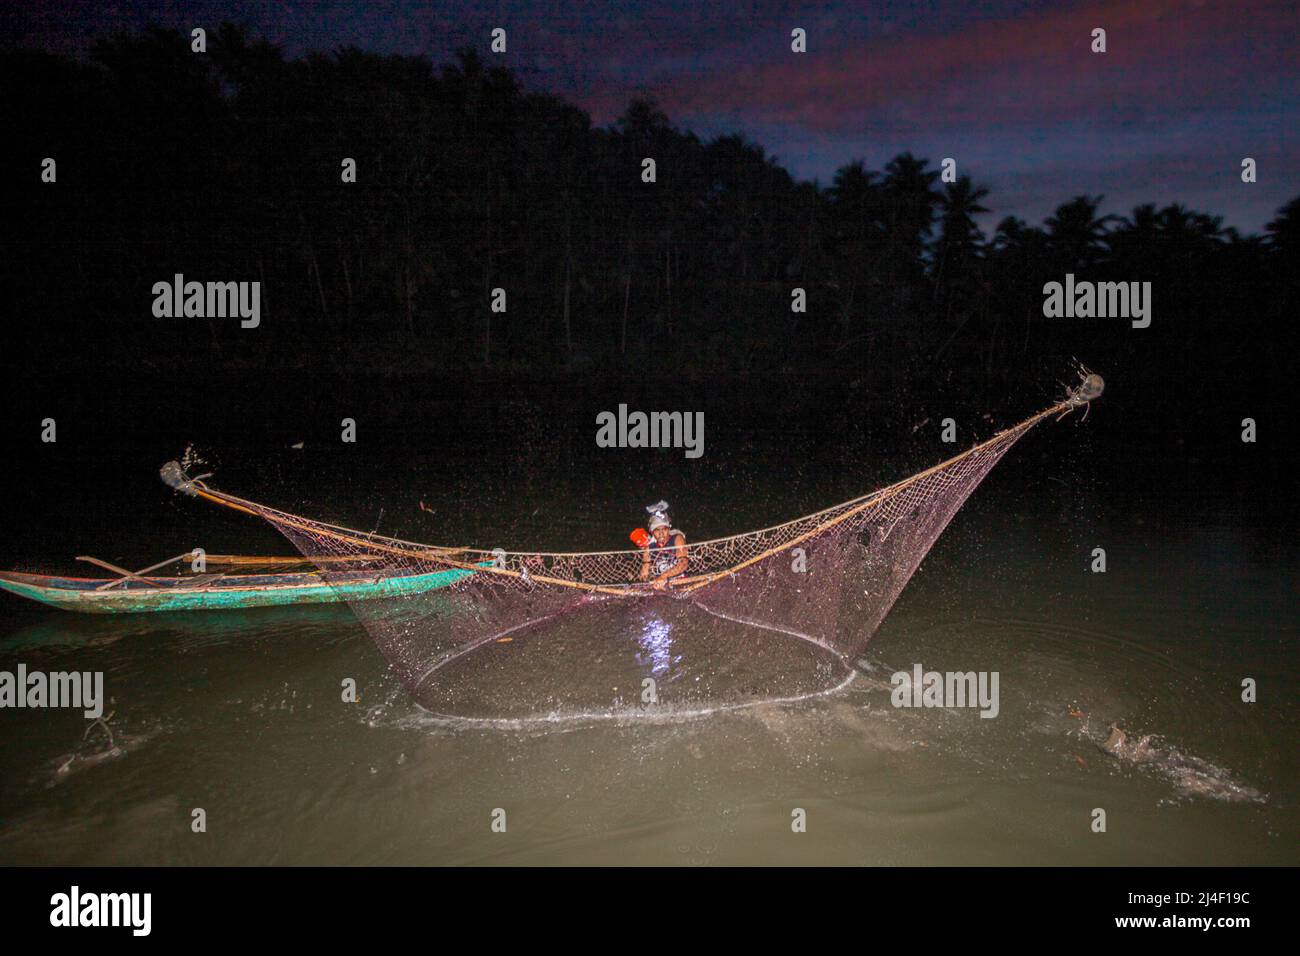 A local fisherman on the Ubod River casting his net at dusk, Donsol, Sorsogon Province, Luzon, Philippines. Stock Photo